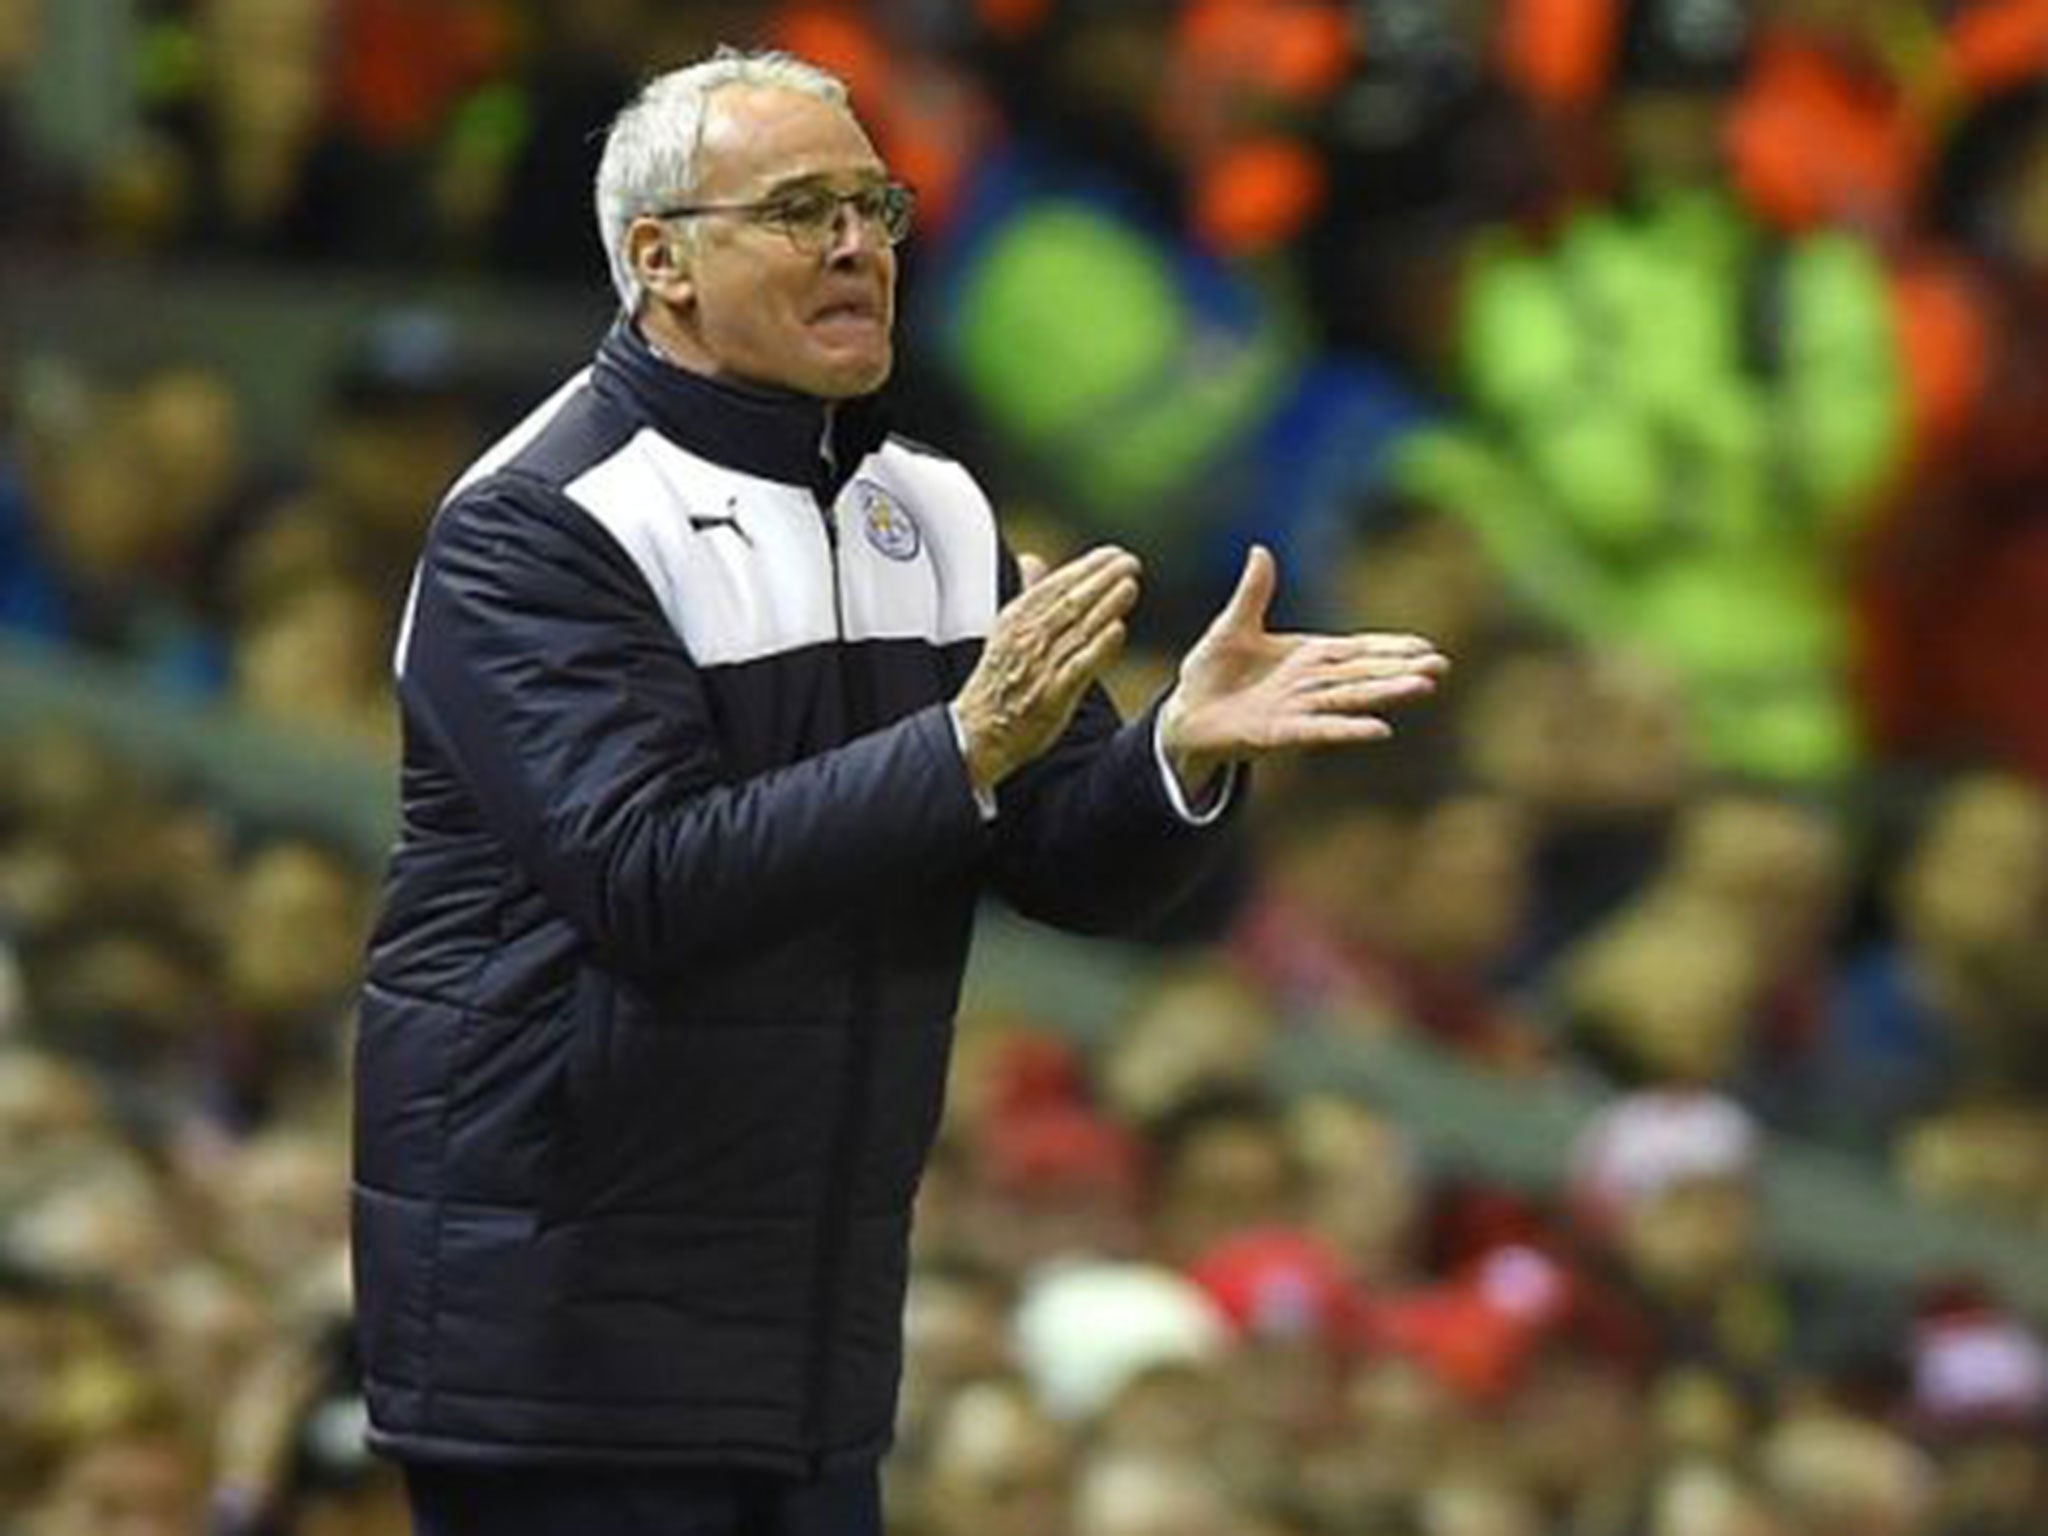 The Leicester City manager Claudio Ranieir